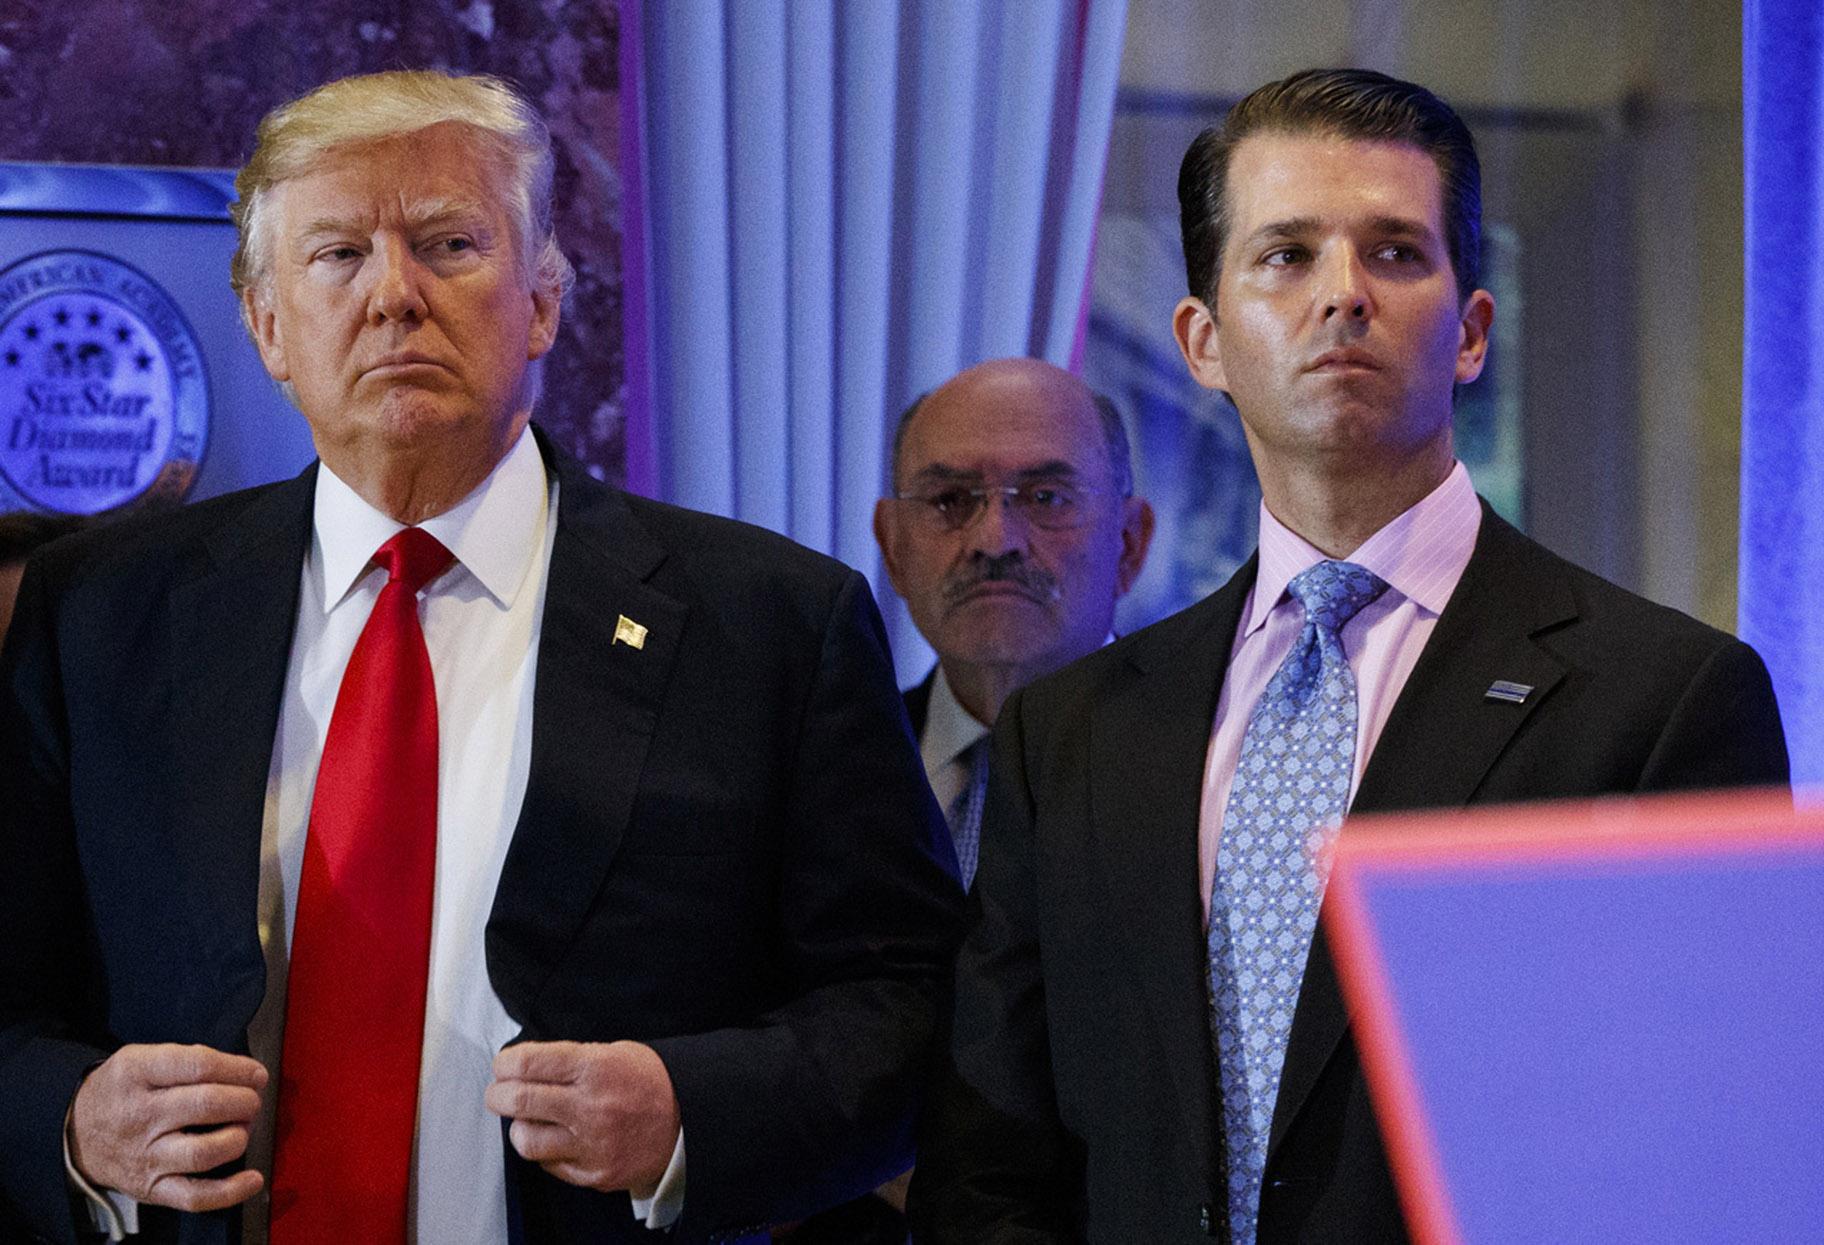 In this Jan. 11, 2017, shows President-elect Donald Trump, left, his chief financial officer Allen Weisselberg, center, and his son Donald Trump Jr., right, attend a news conference in the lobby of Trump Tower in New York. (AP Photo / Evan Vucci, File)